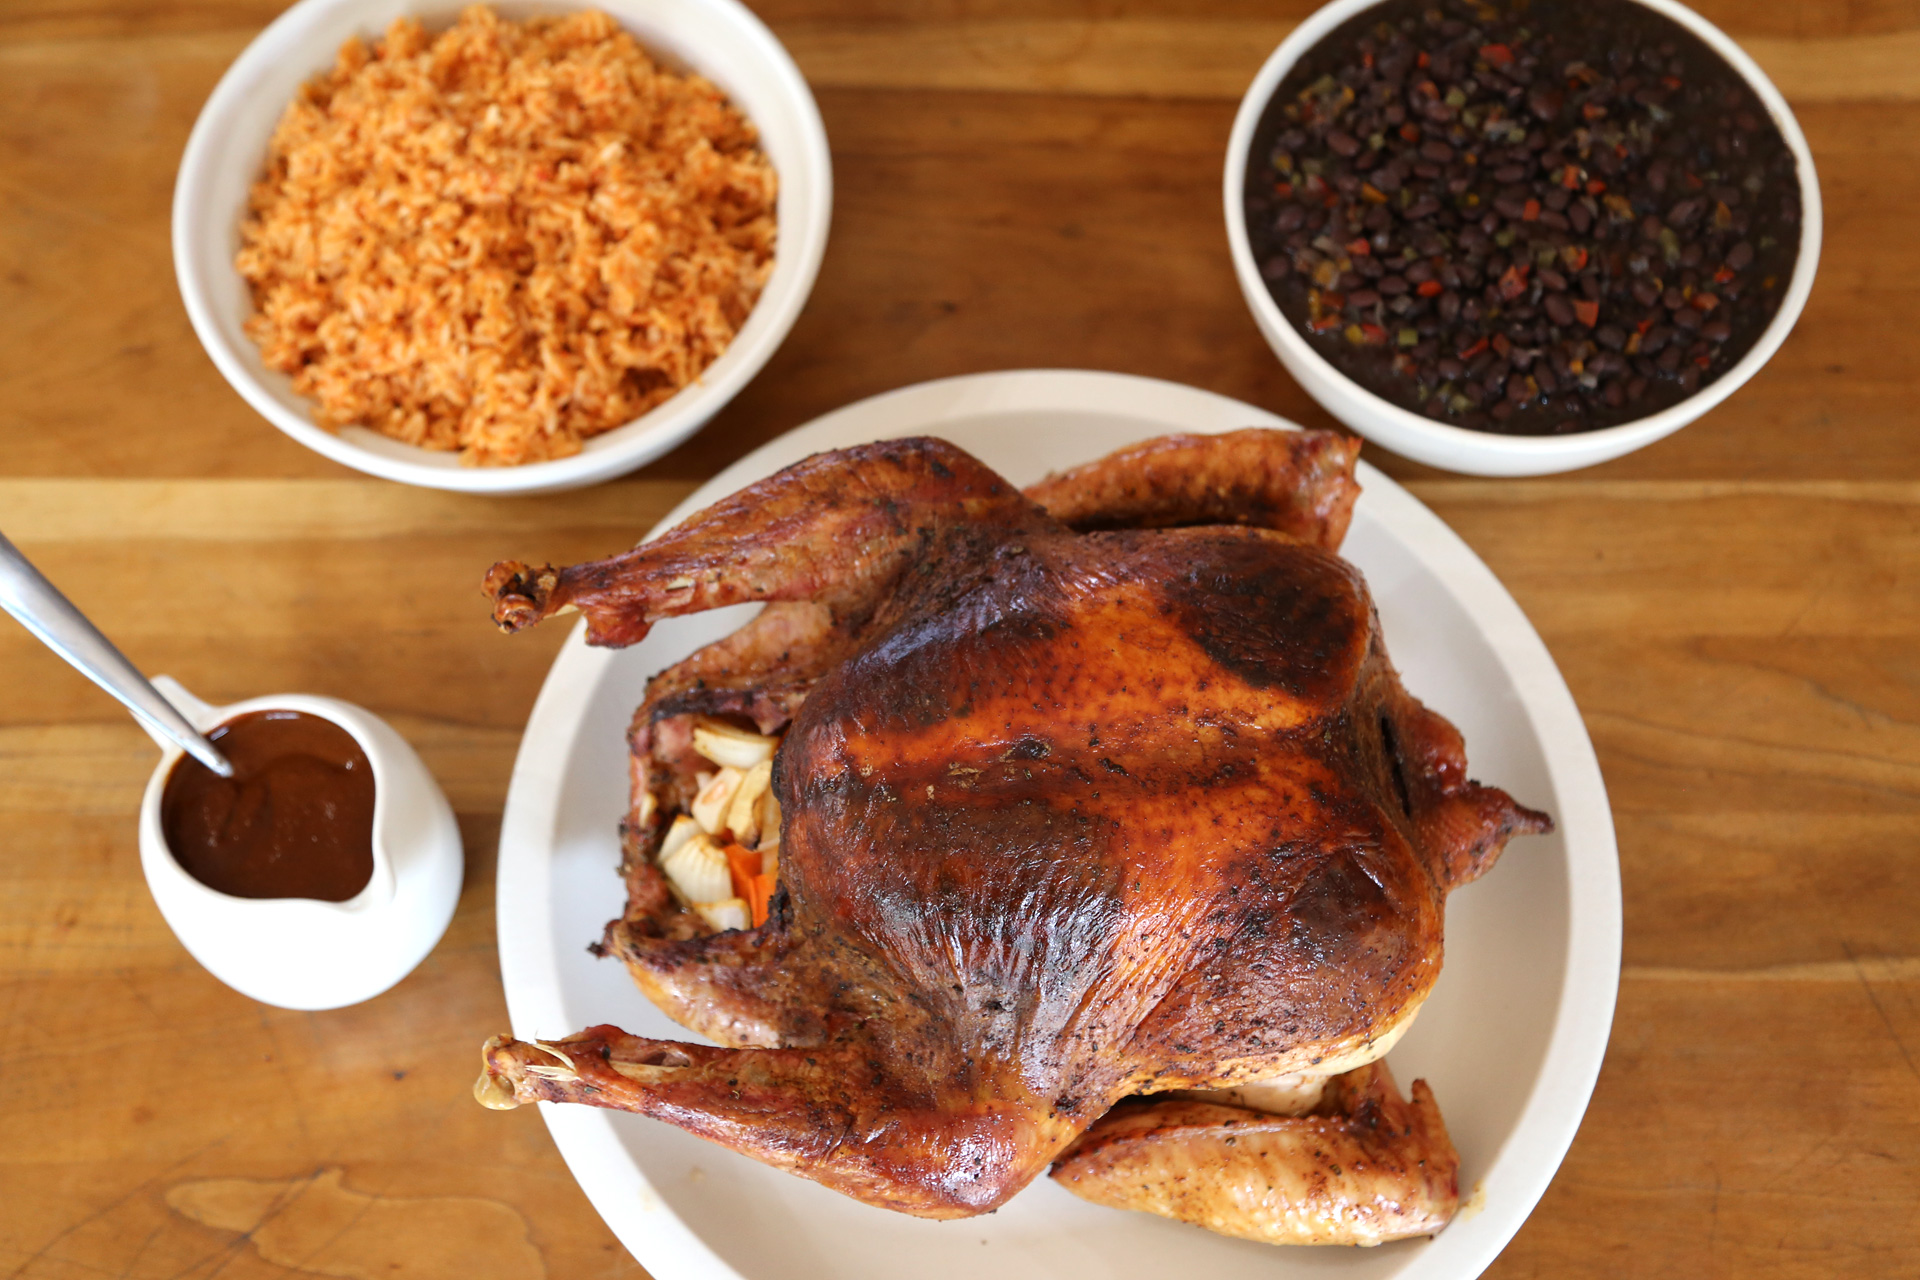 Chile-Rubbed Roast Turkey served with Savory Black Beans, Mexican Rice and Mole Gravy